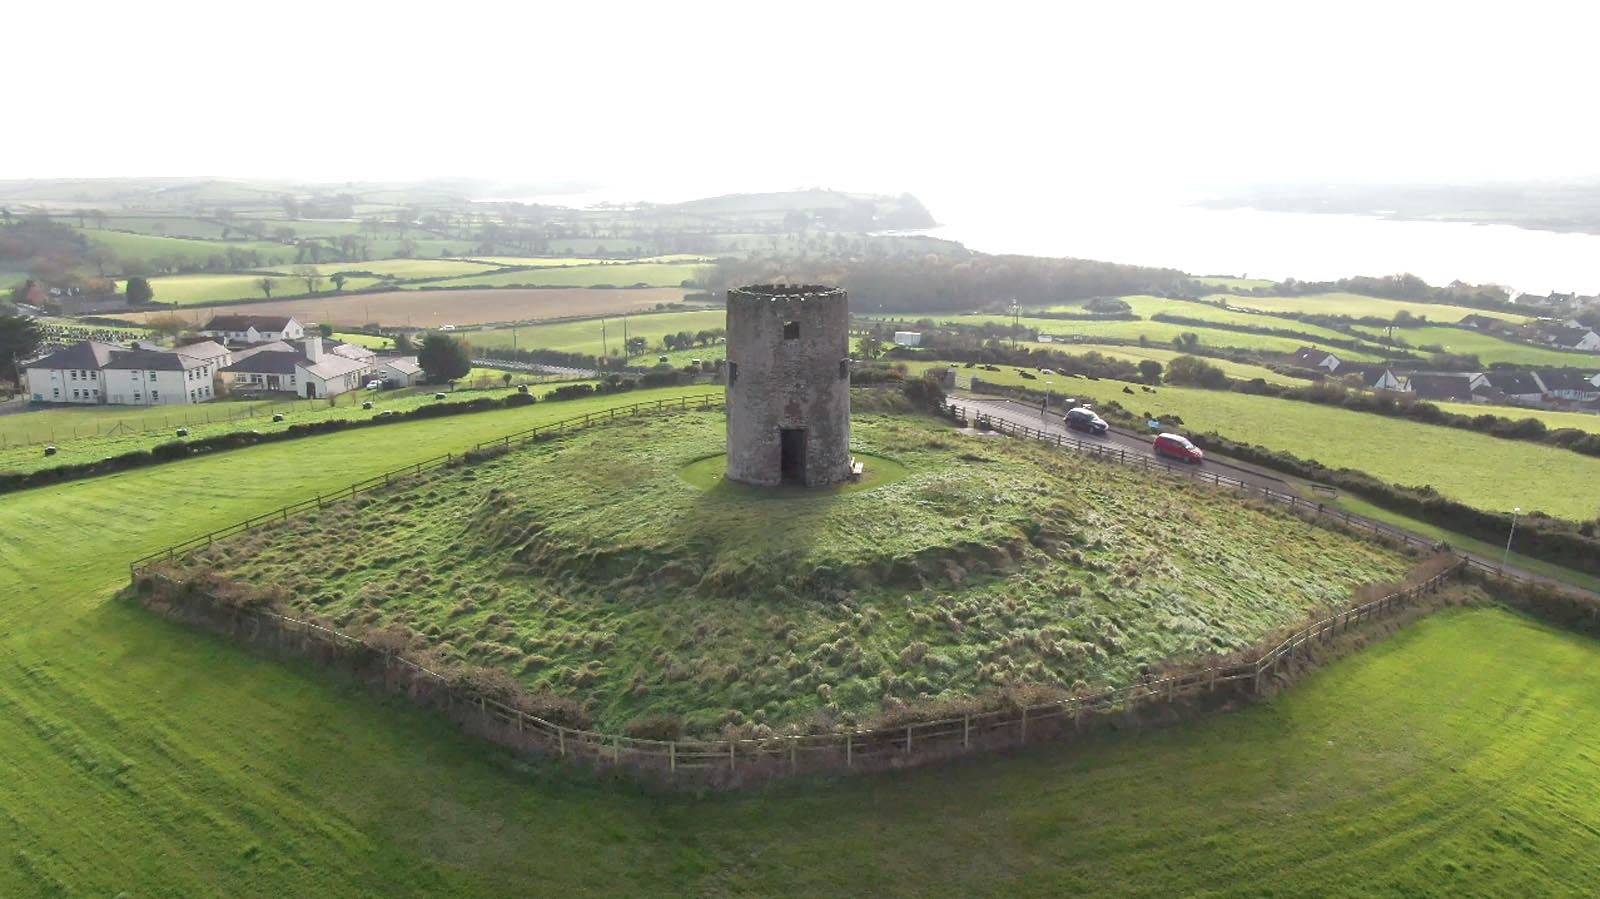 Aerial drone photography and video production services Dublin and Ireland portfolio - screenshot 1 of Portico Ards video